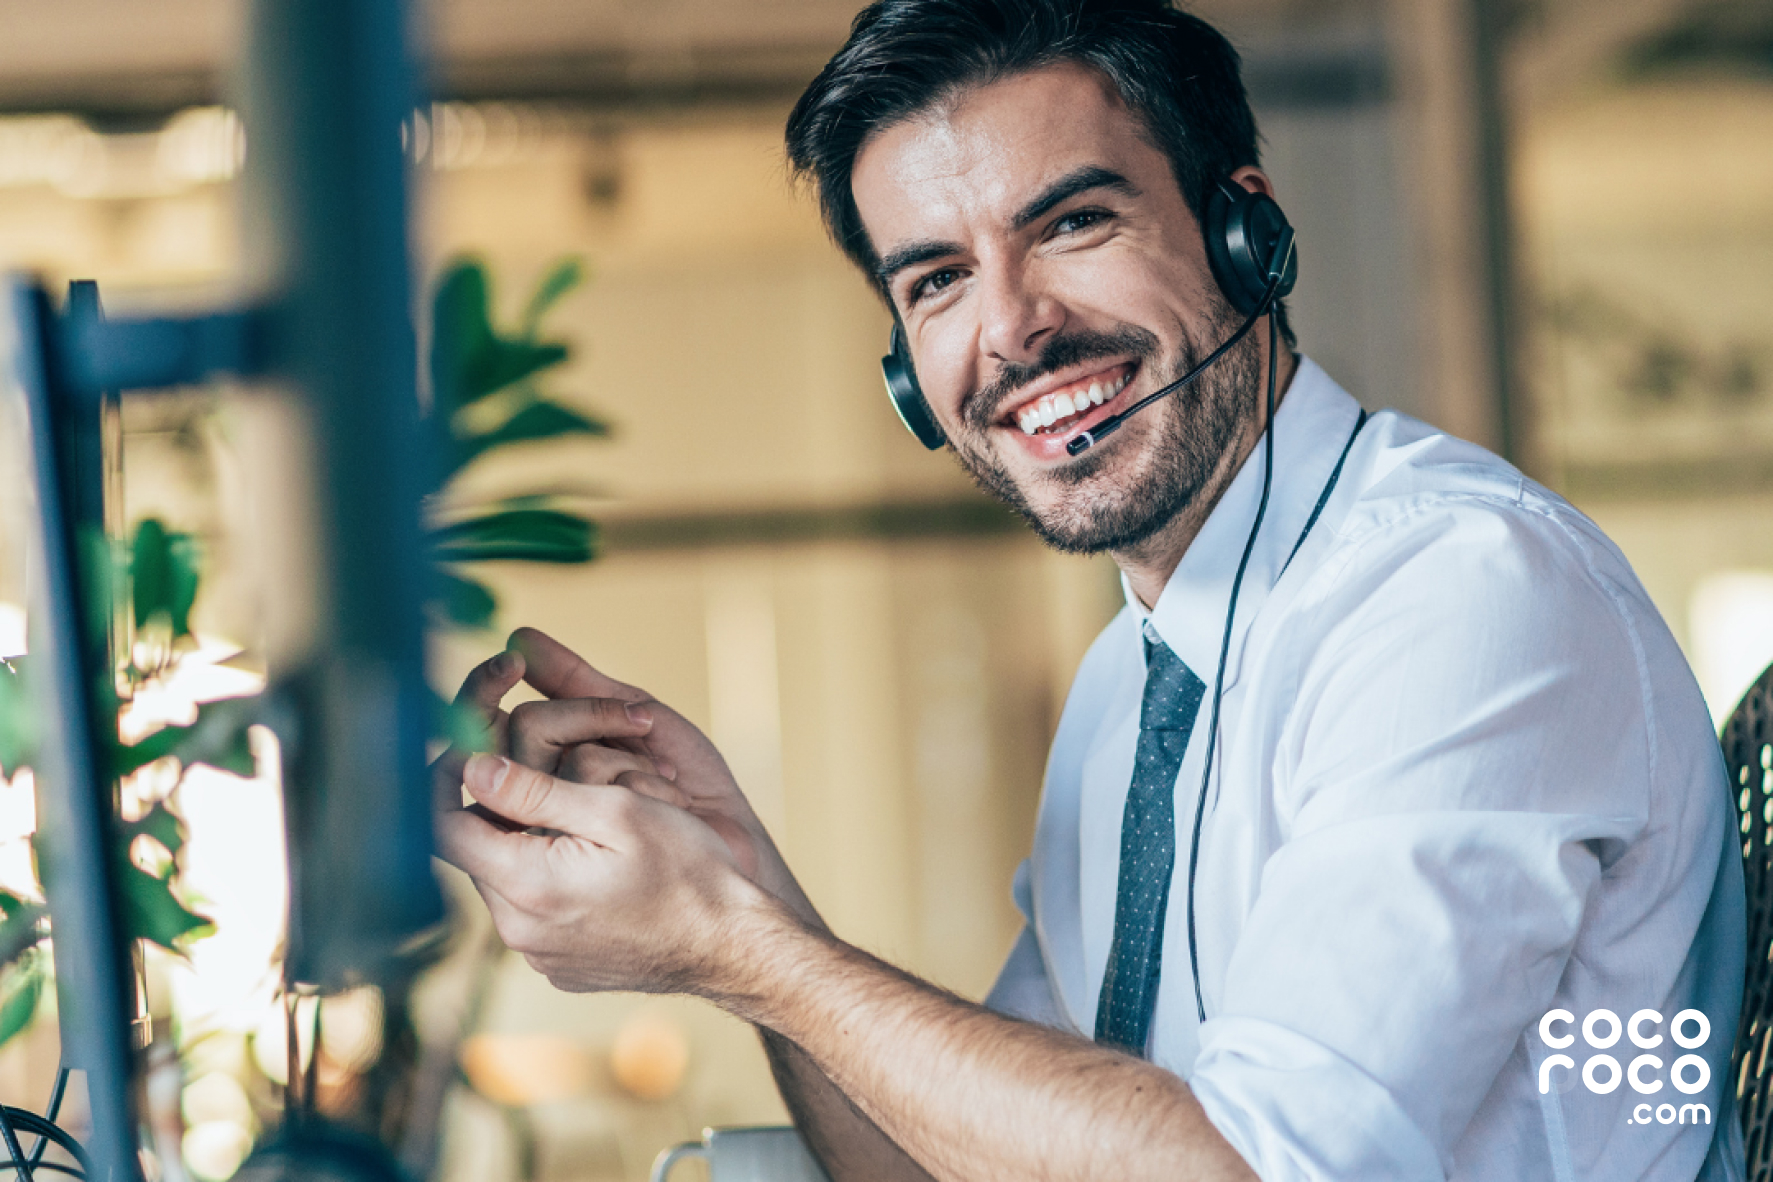 Image of a customer service representative at work, looking confident and professional. The representative is wearing a headset and is focused on the task at hand, with a friendly smile on their face. The image portrays a competent and approachable representative, ready to assist customers with their needs.